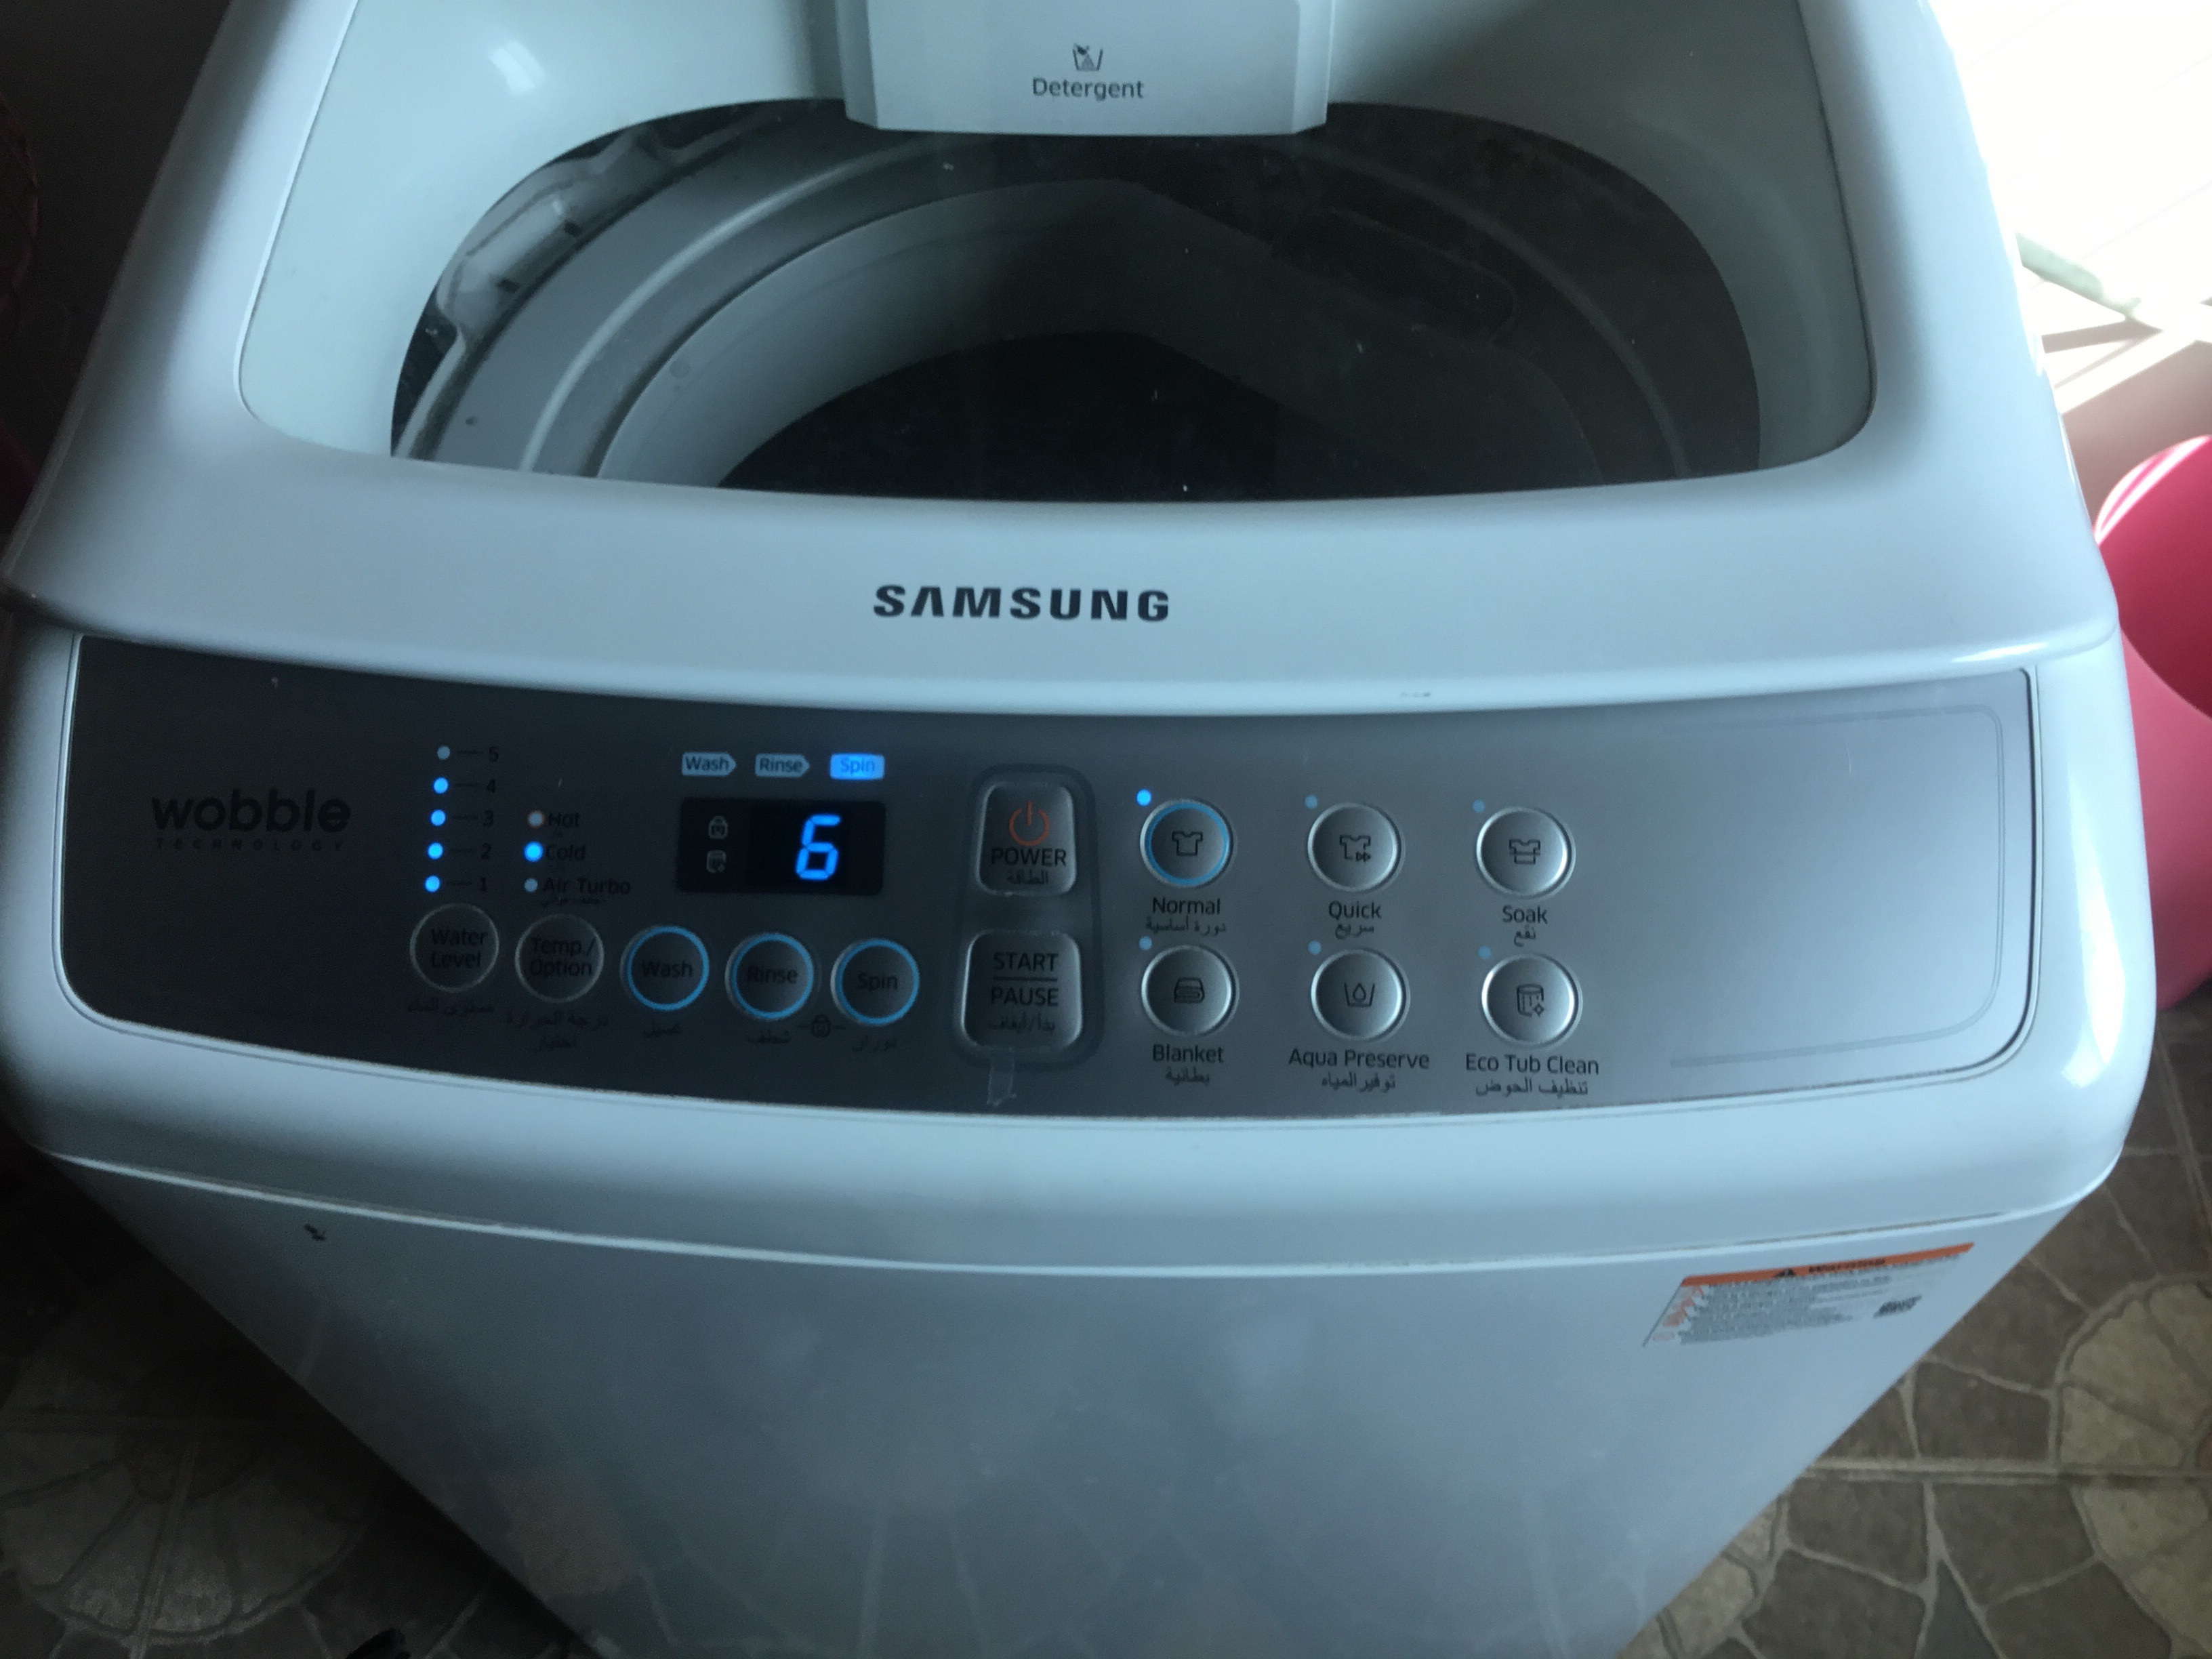 Haier 8 5 Kg 826 Series Fully Automatic Top Load Hwm 85 826 Washing Machine 10 Years Warranty Buy Online At Best Prices In Pakistan Daraz Pk